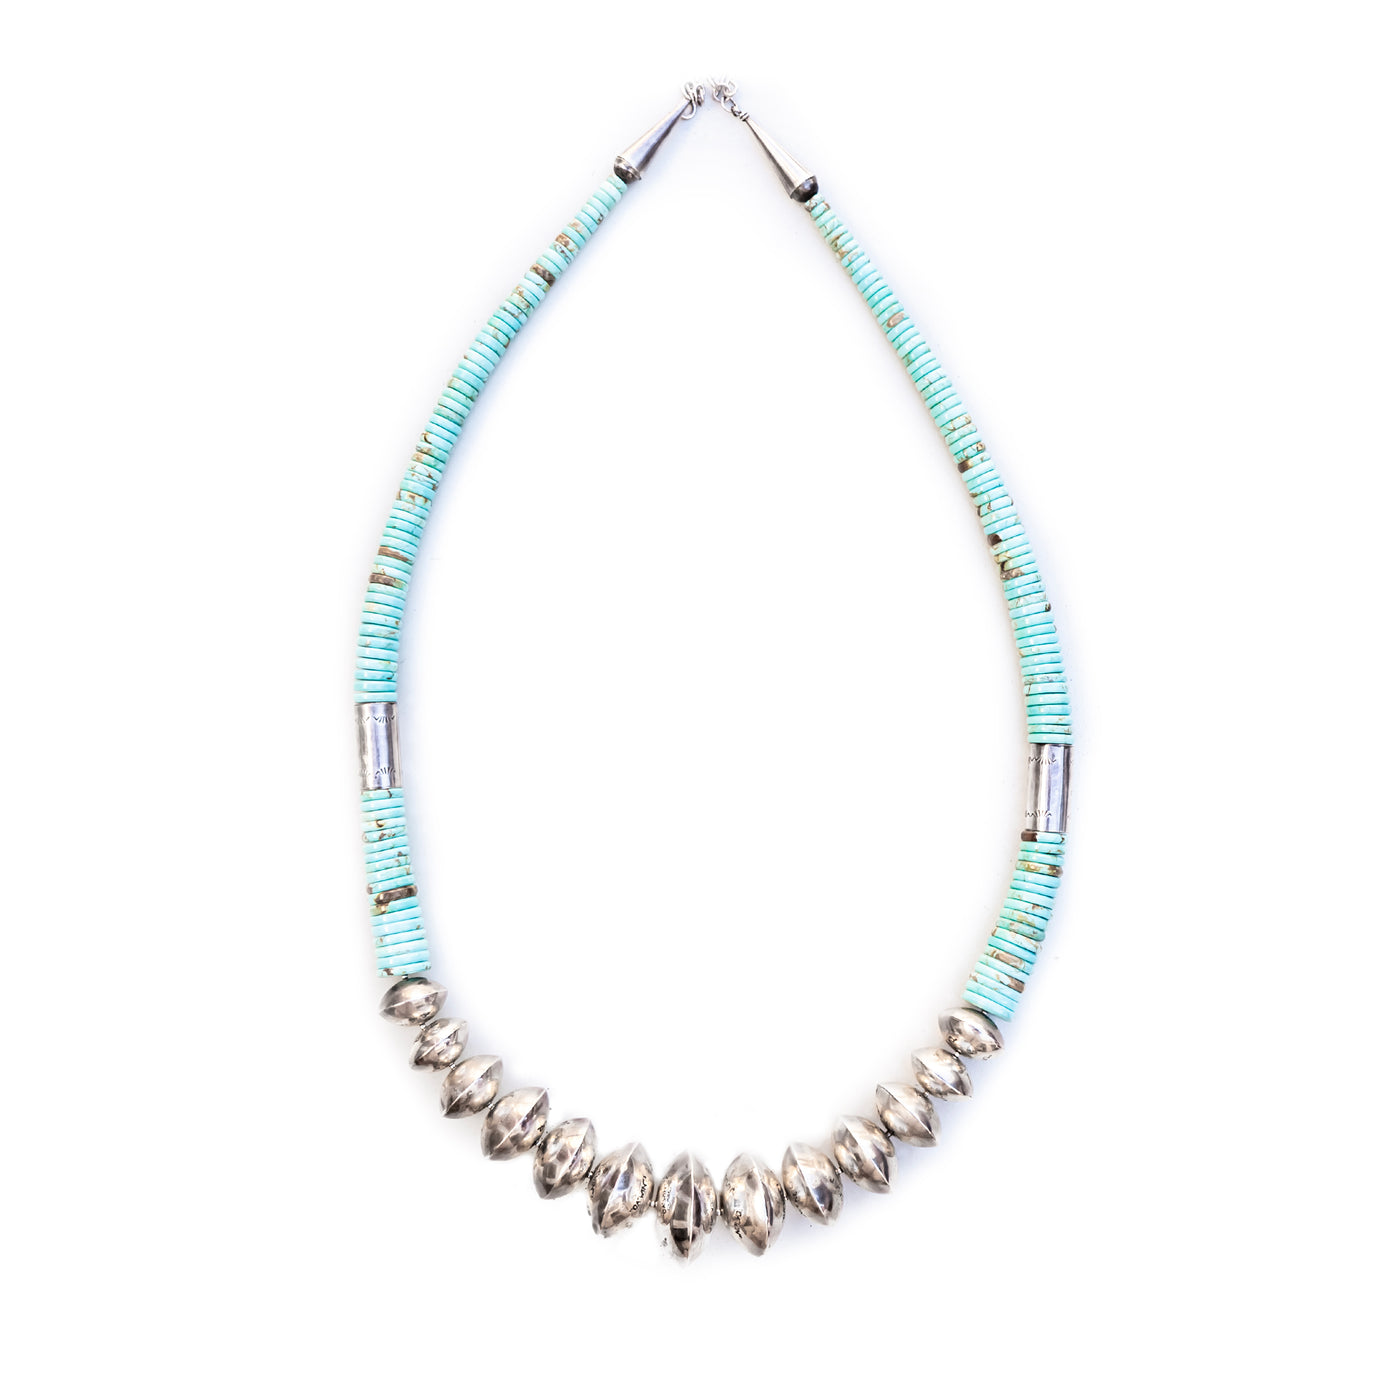 Turquoise and Silver Bead Necklace Long